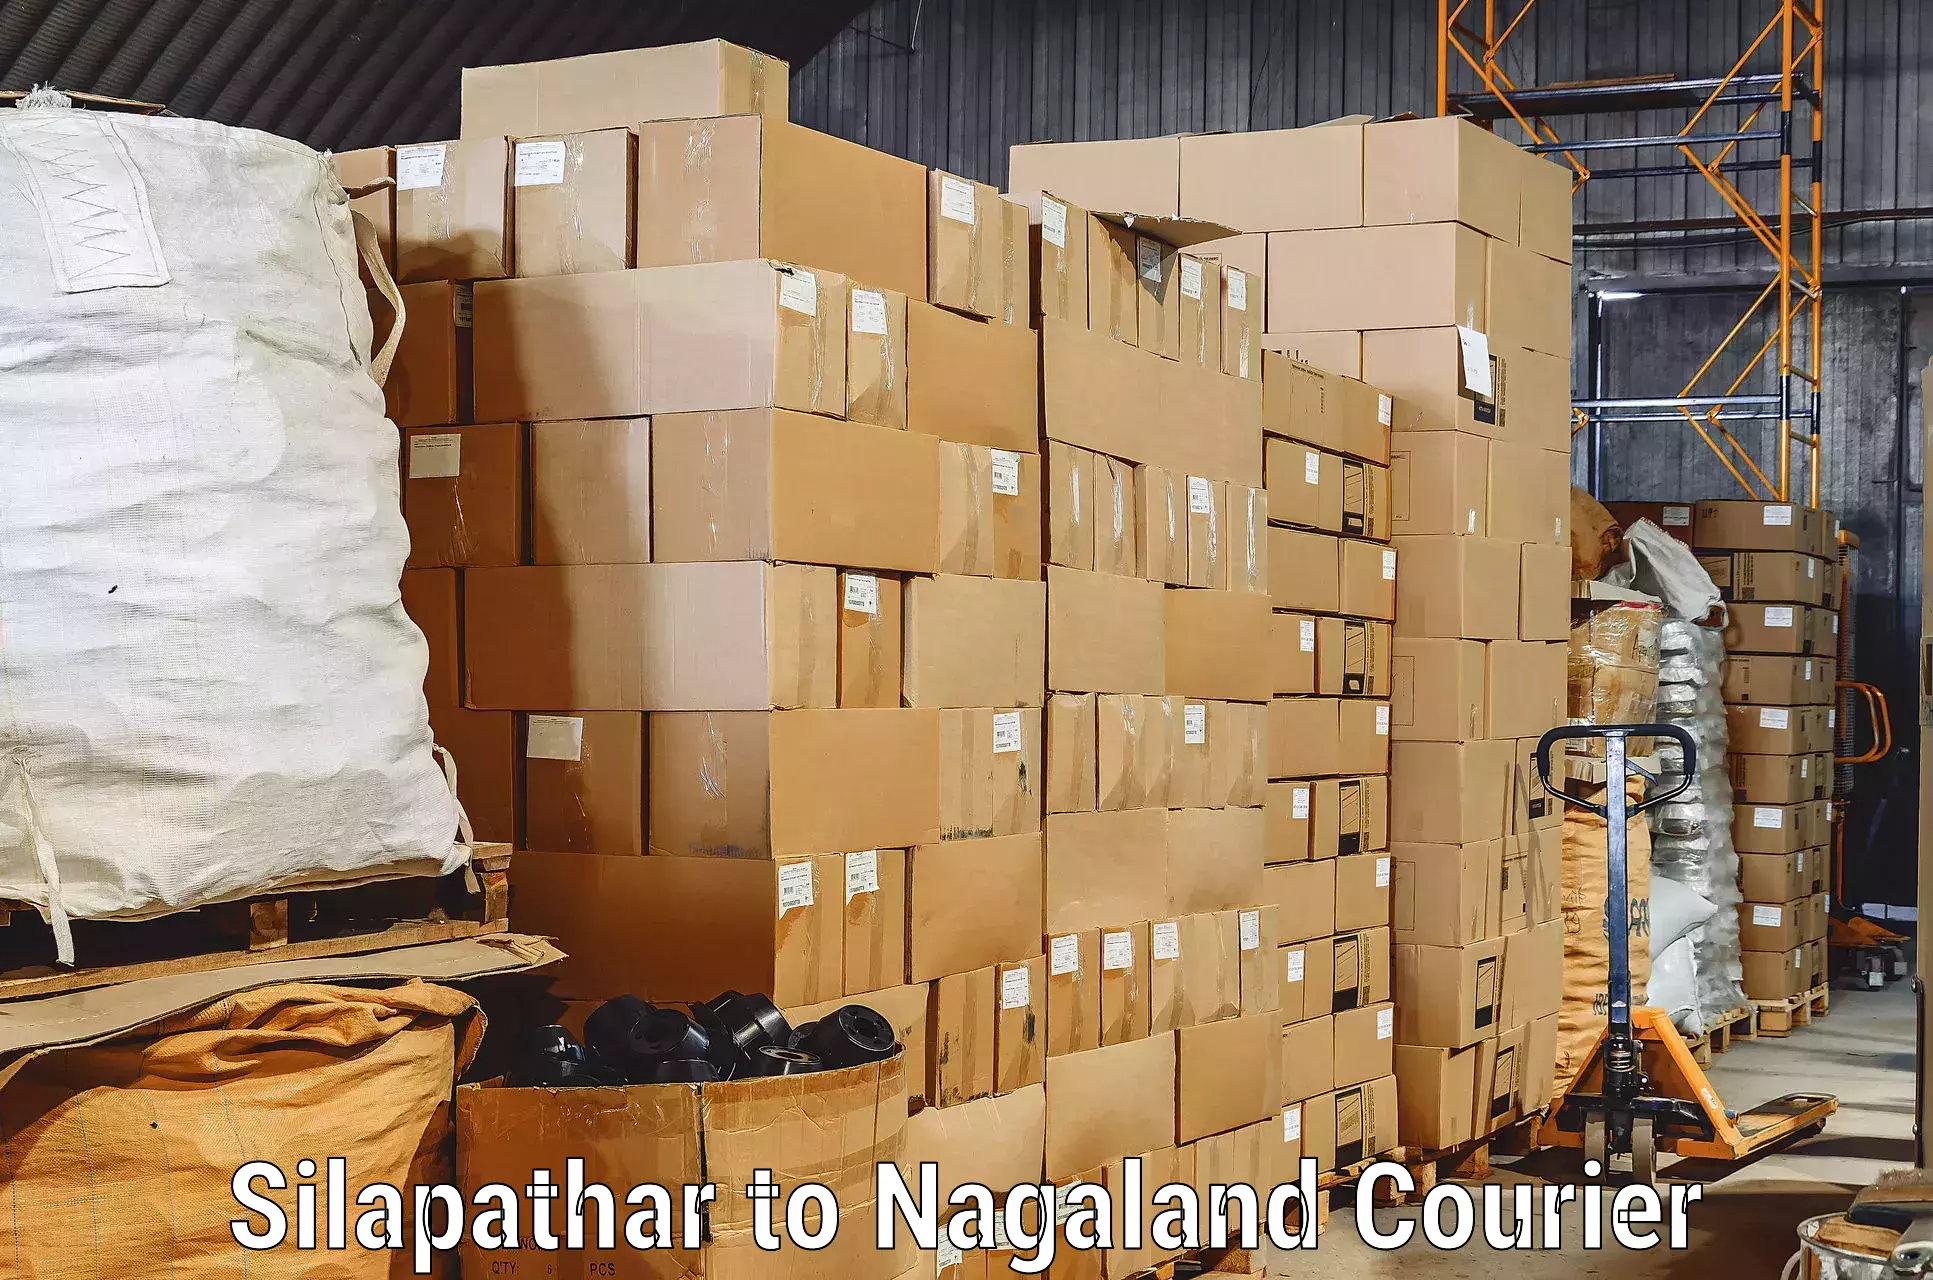 Furniture transport specialists Silapathar to Nagaland